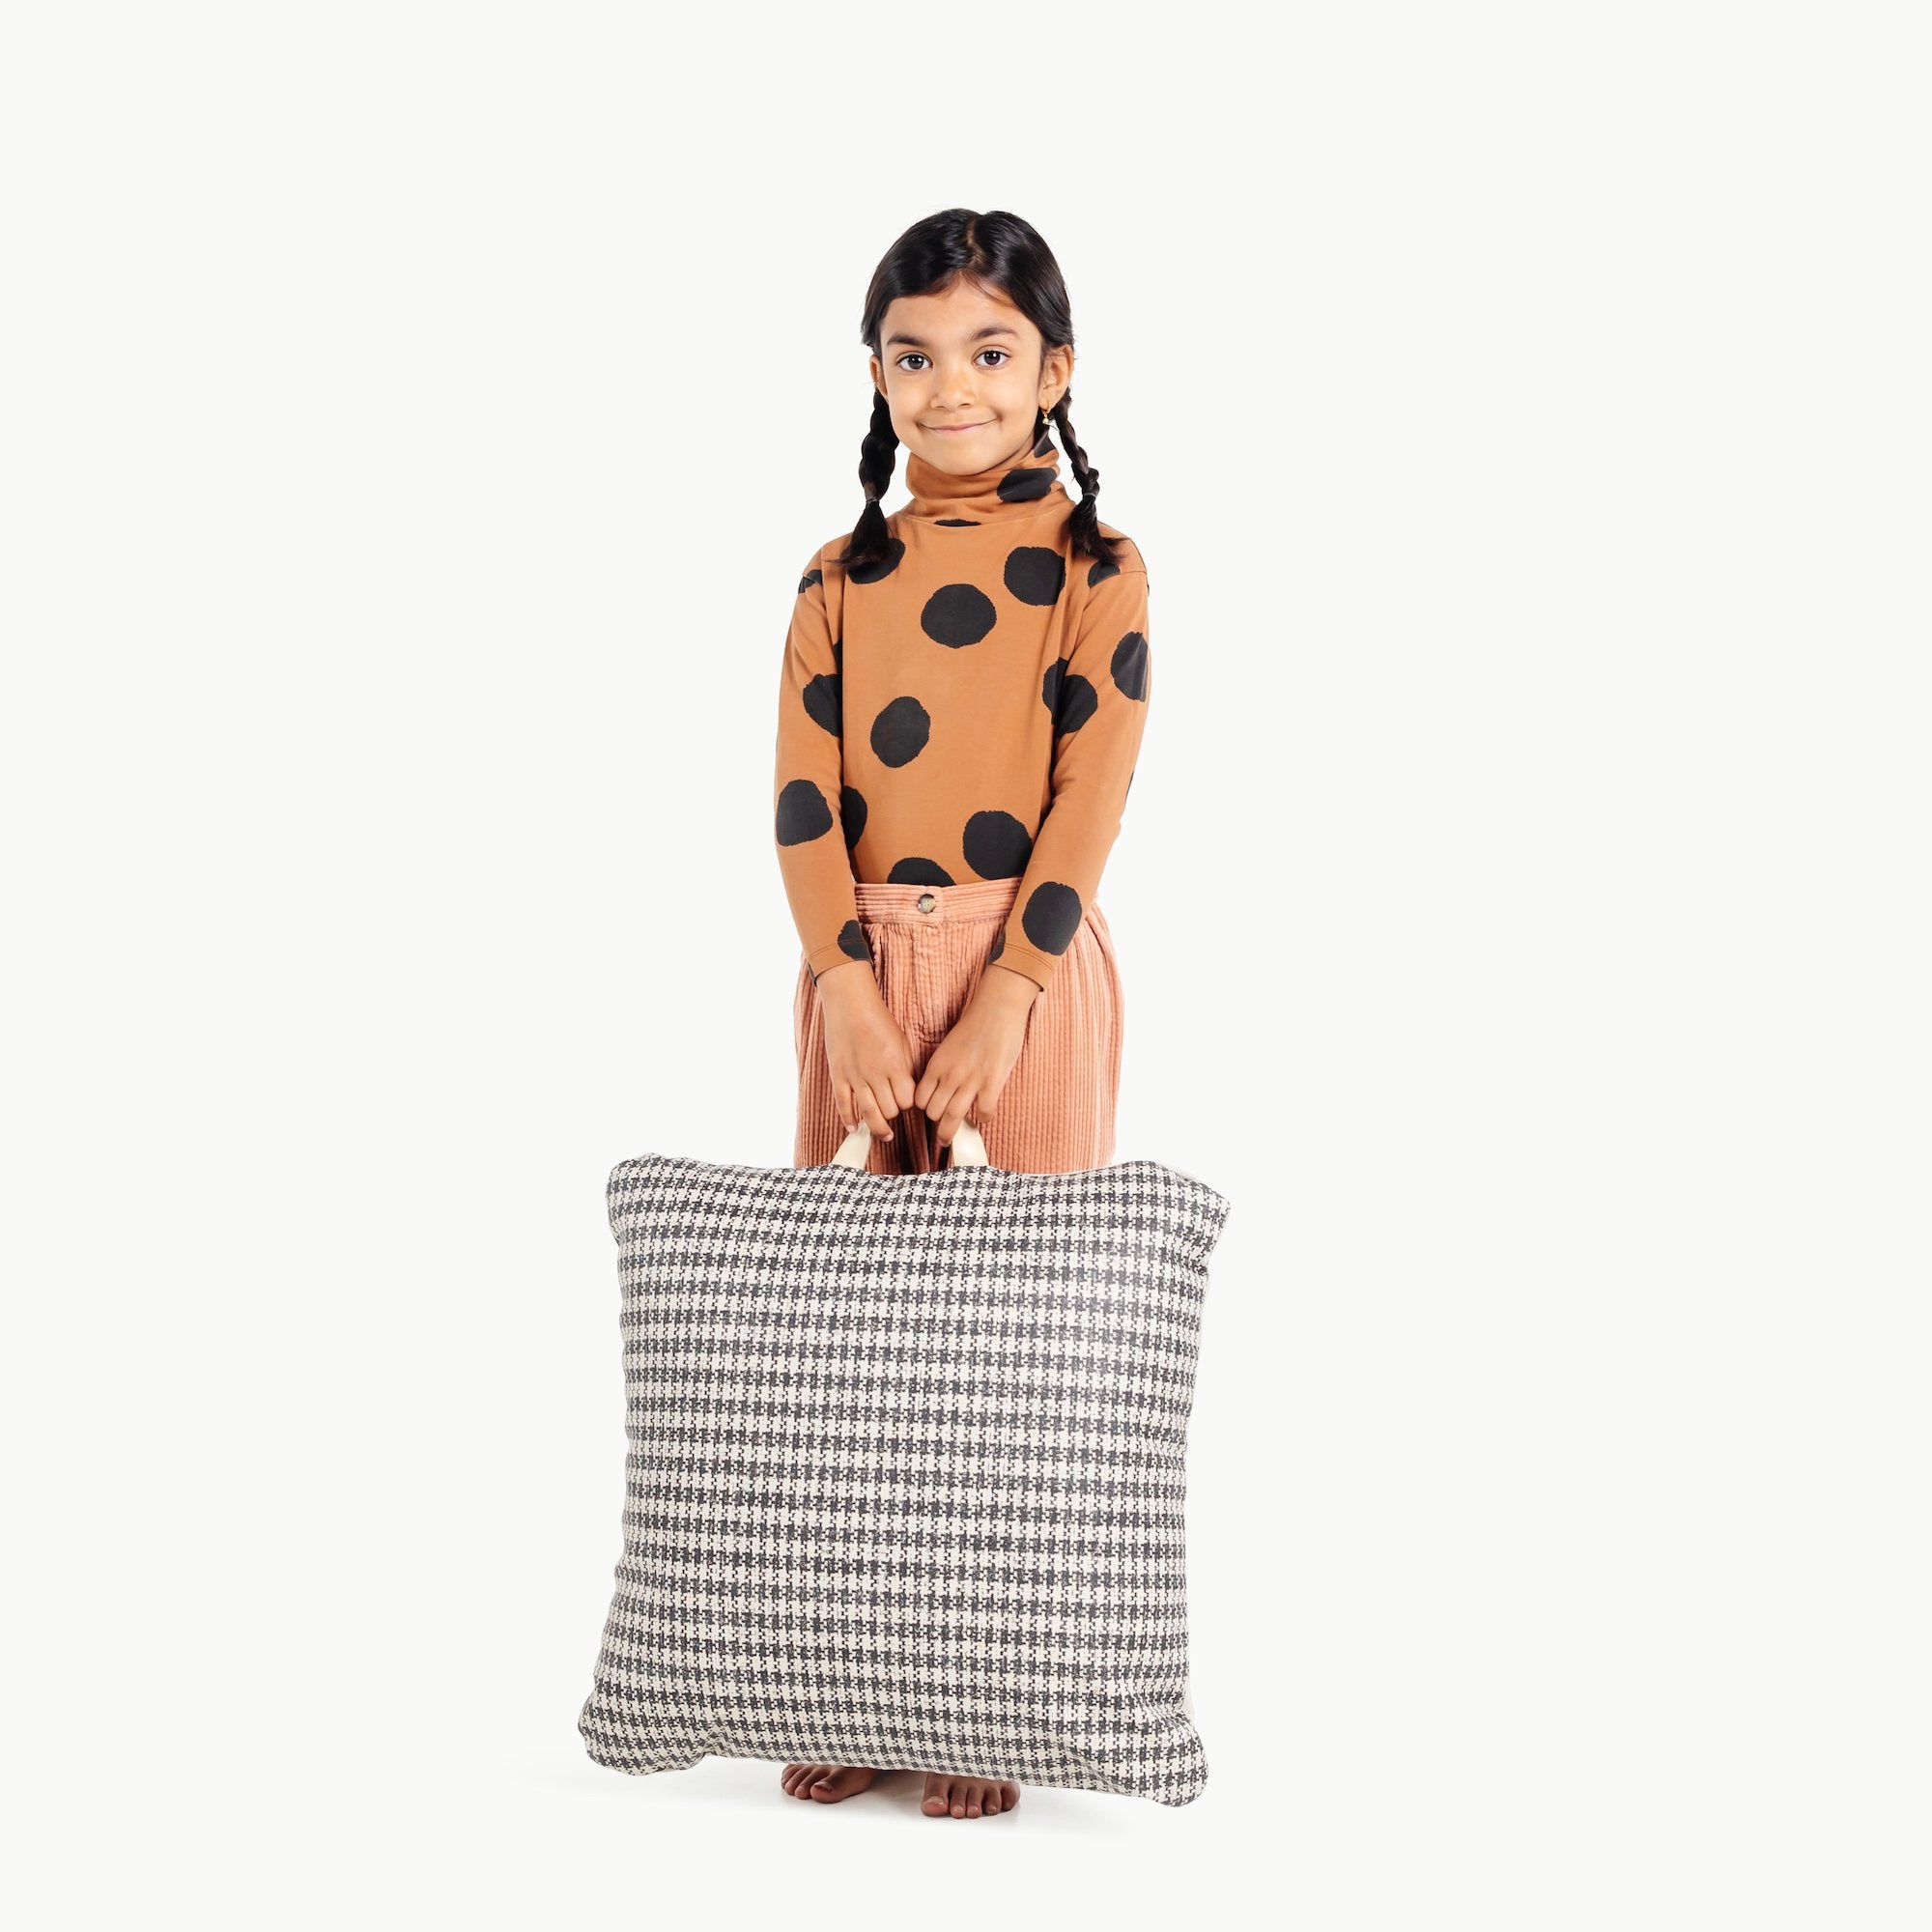 Houndstooth (on sale) / Square@Kid holding the Houndstooth Square Mini Floor Cushion